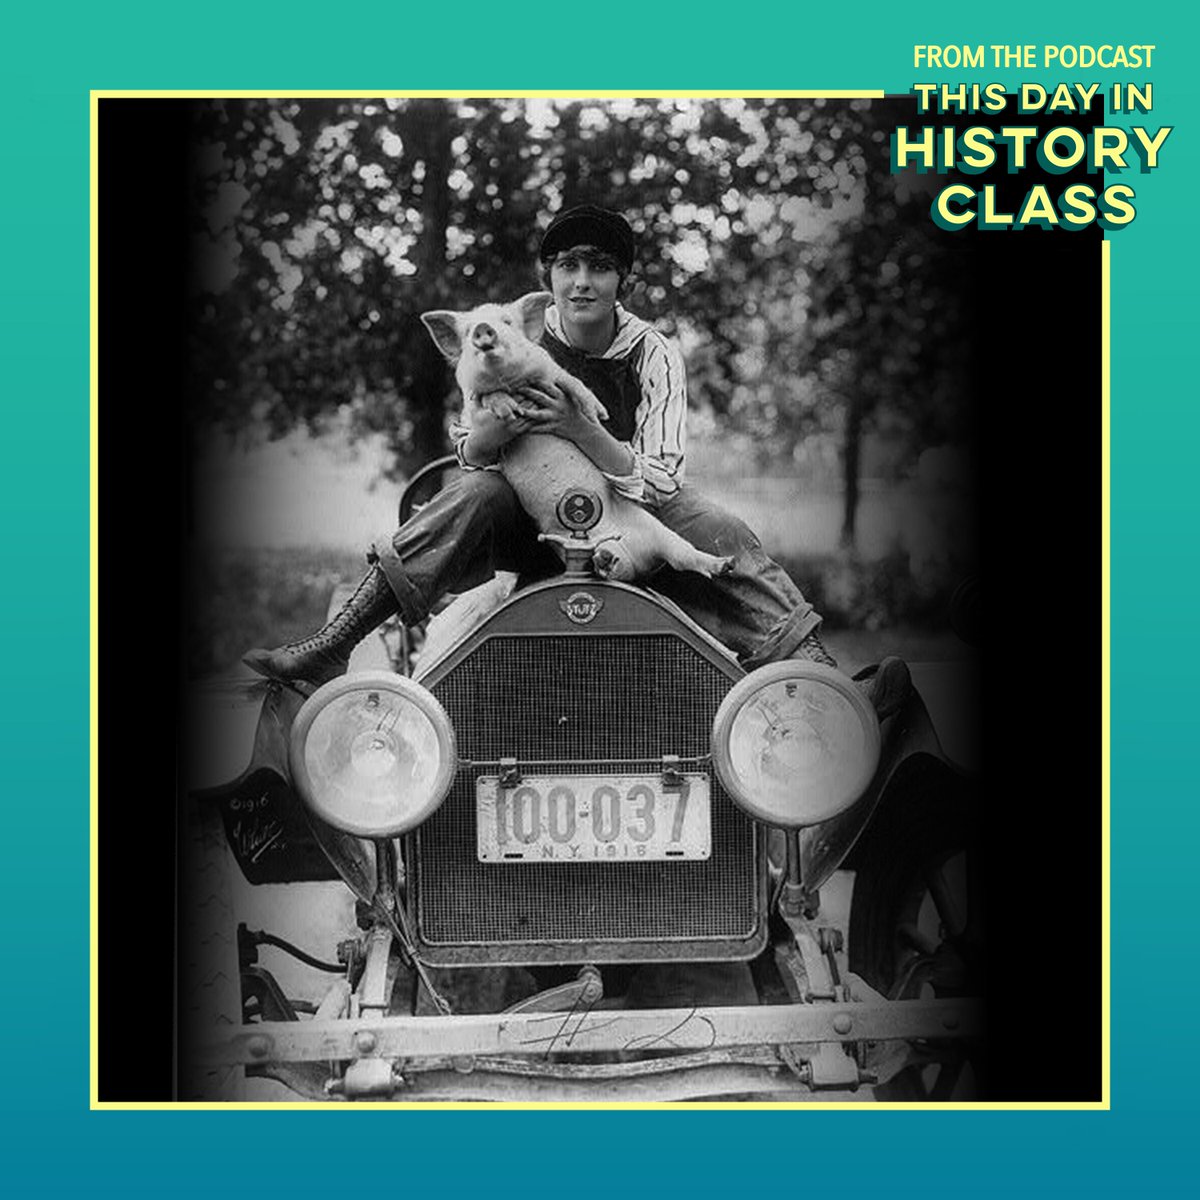 #OnThisDay in 1901, New York became the first state in the U.S. to require license plates on motor vehicles.

Before that, all U.S. cars had been unregistered/could only be identified by law enforcement through make, model, color, etc.

#todayinhistory #historylovers